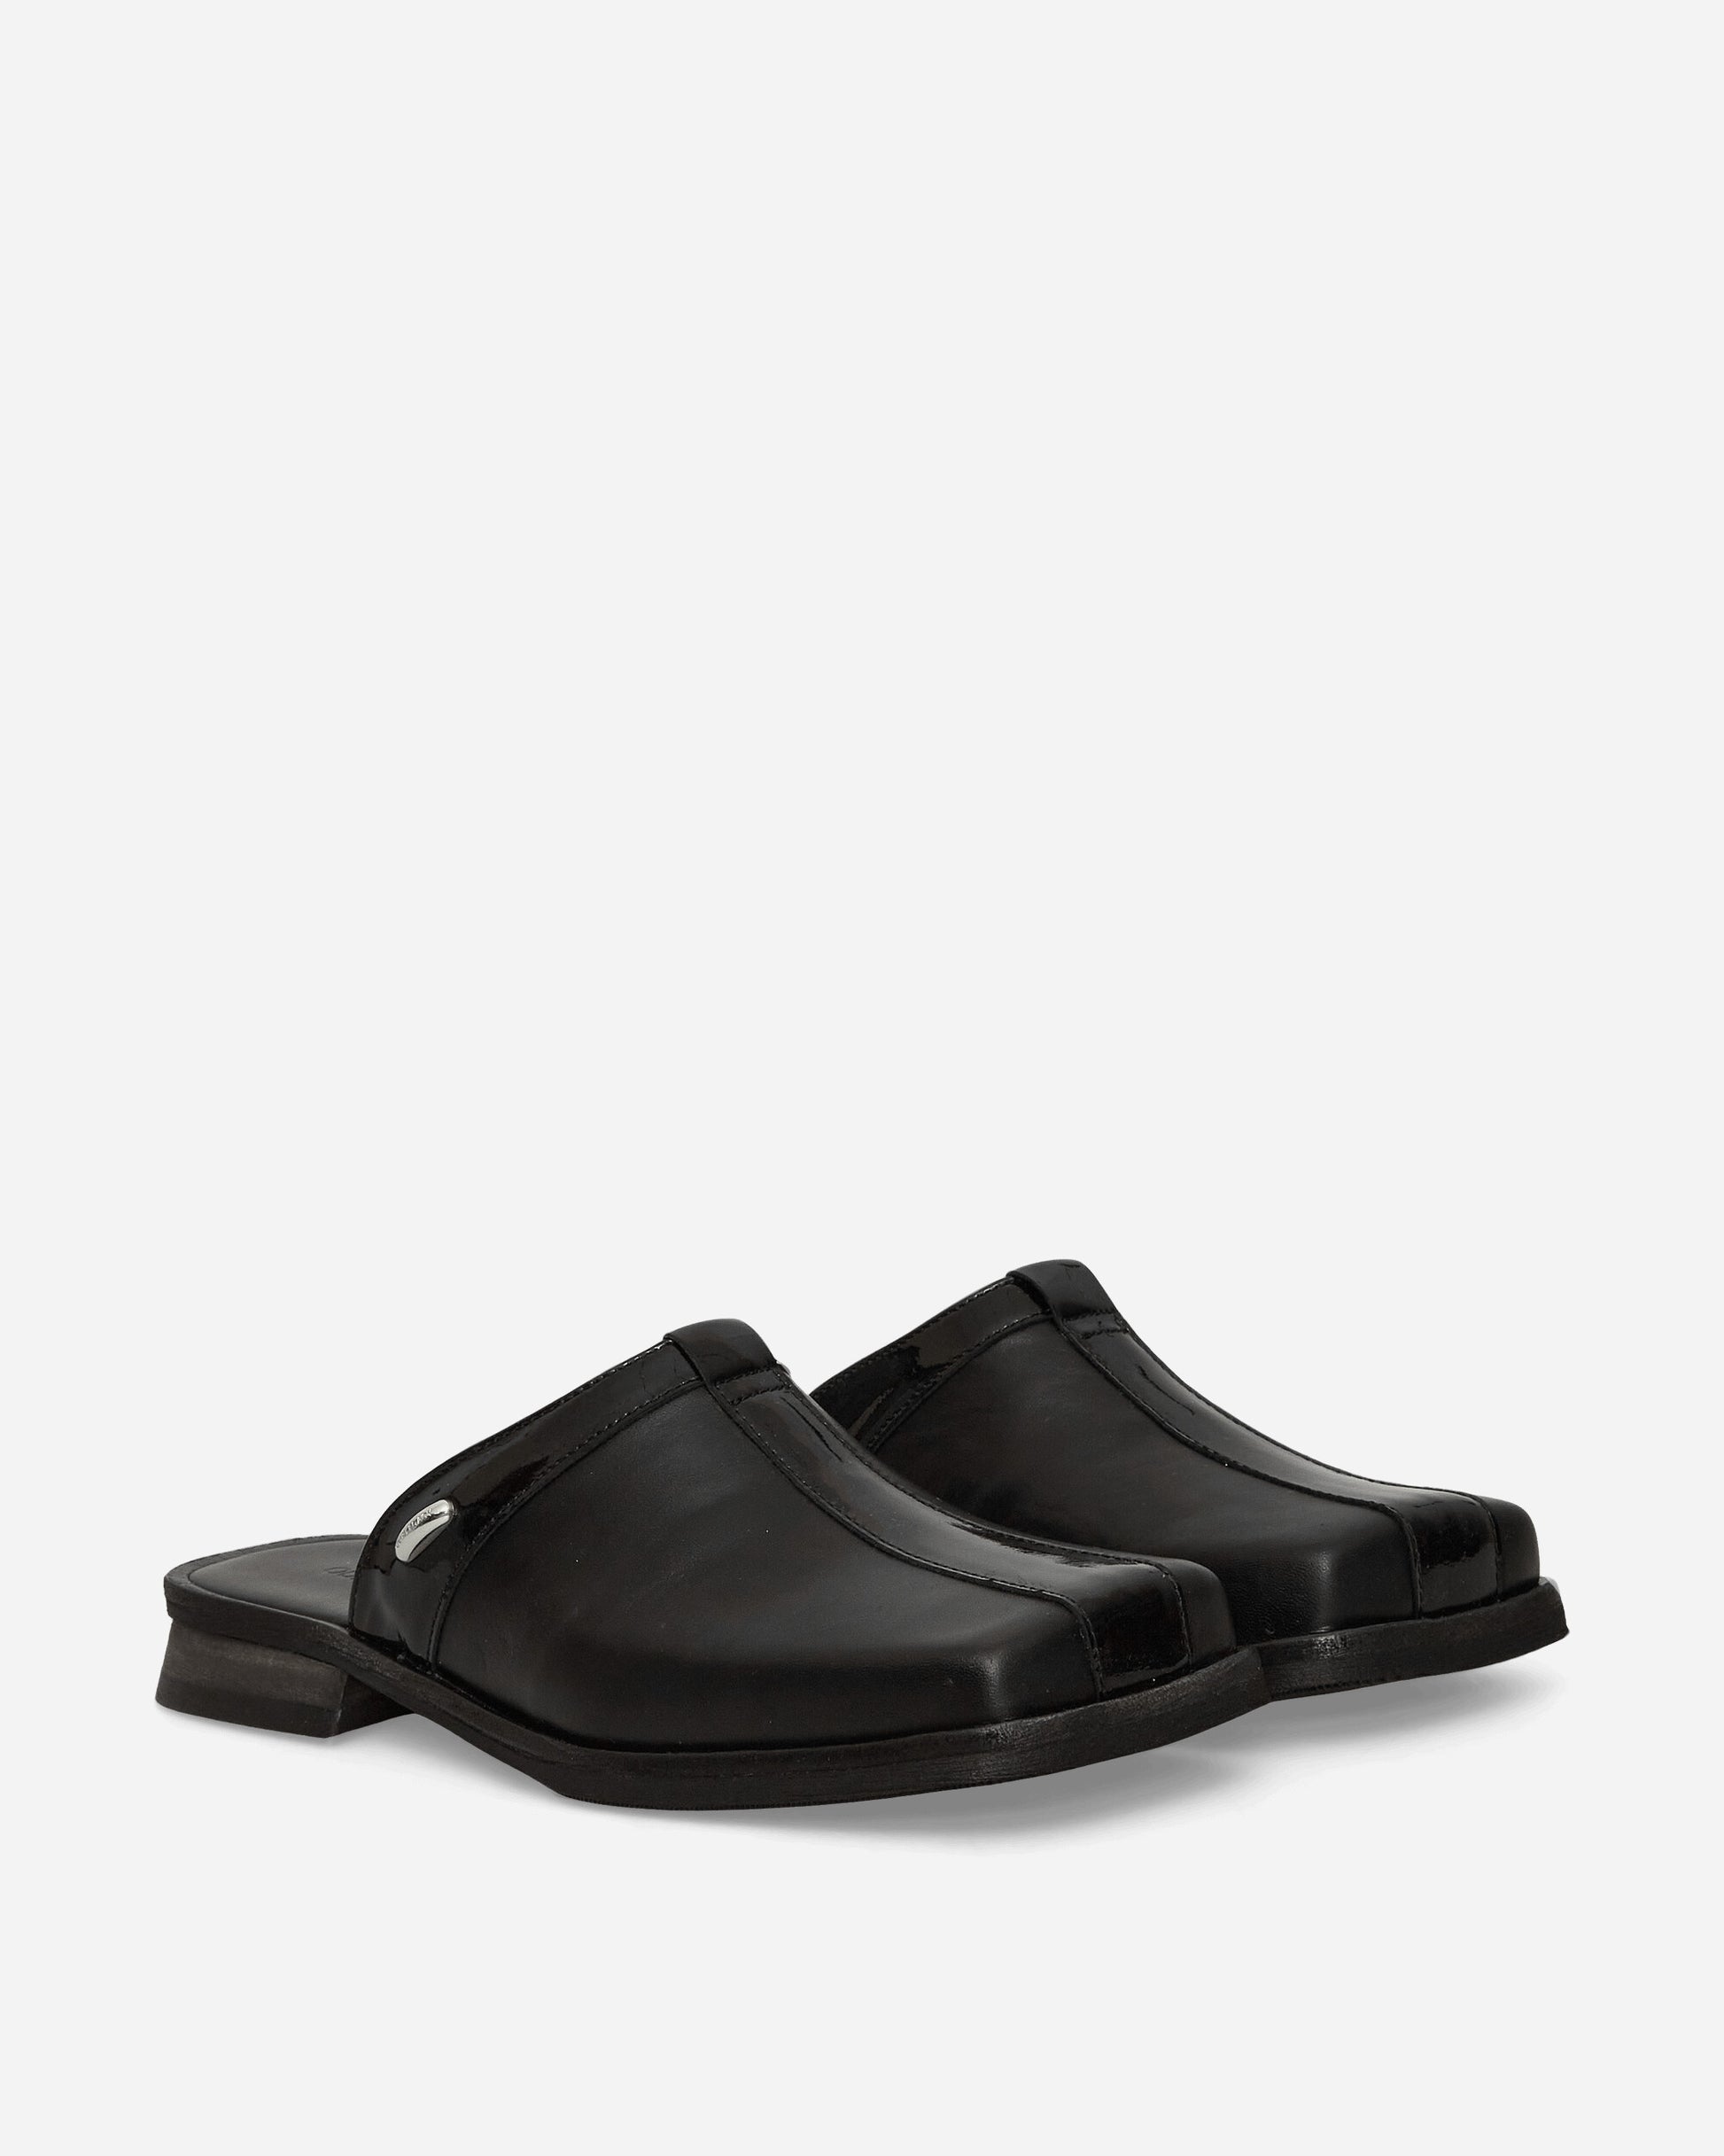 Our Legacy Wmns Blunt Mule Top Dyed Black Leather Sandals and Slides Sandals and Mules A2247ST 001